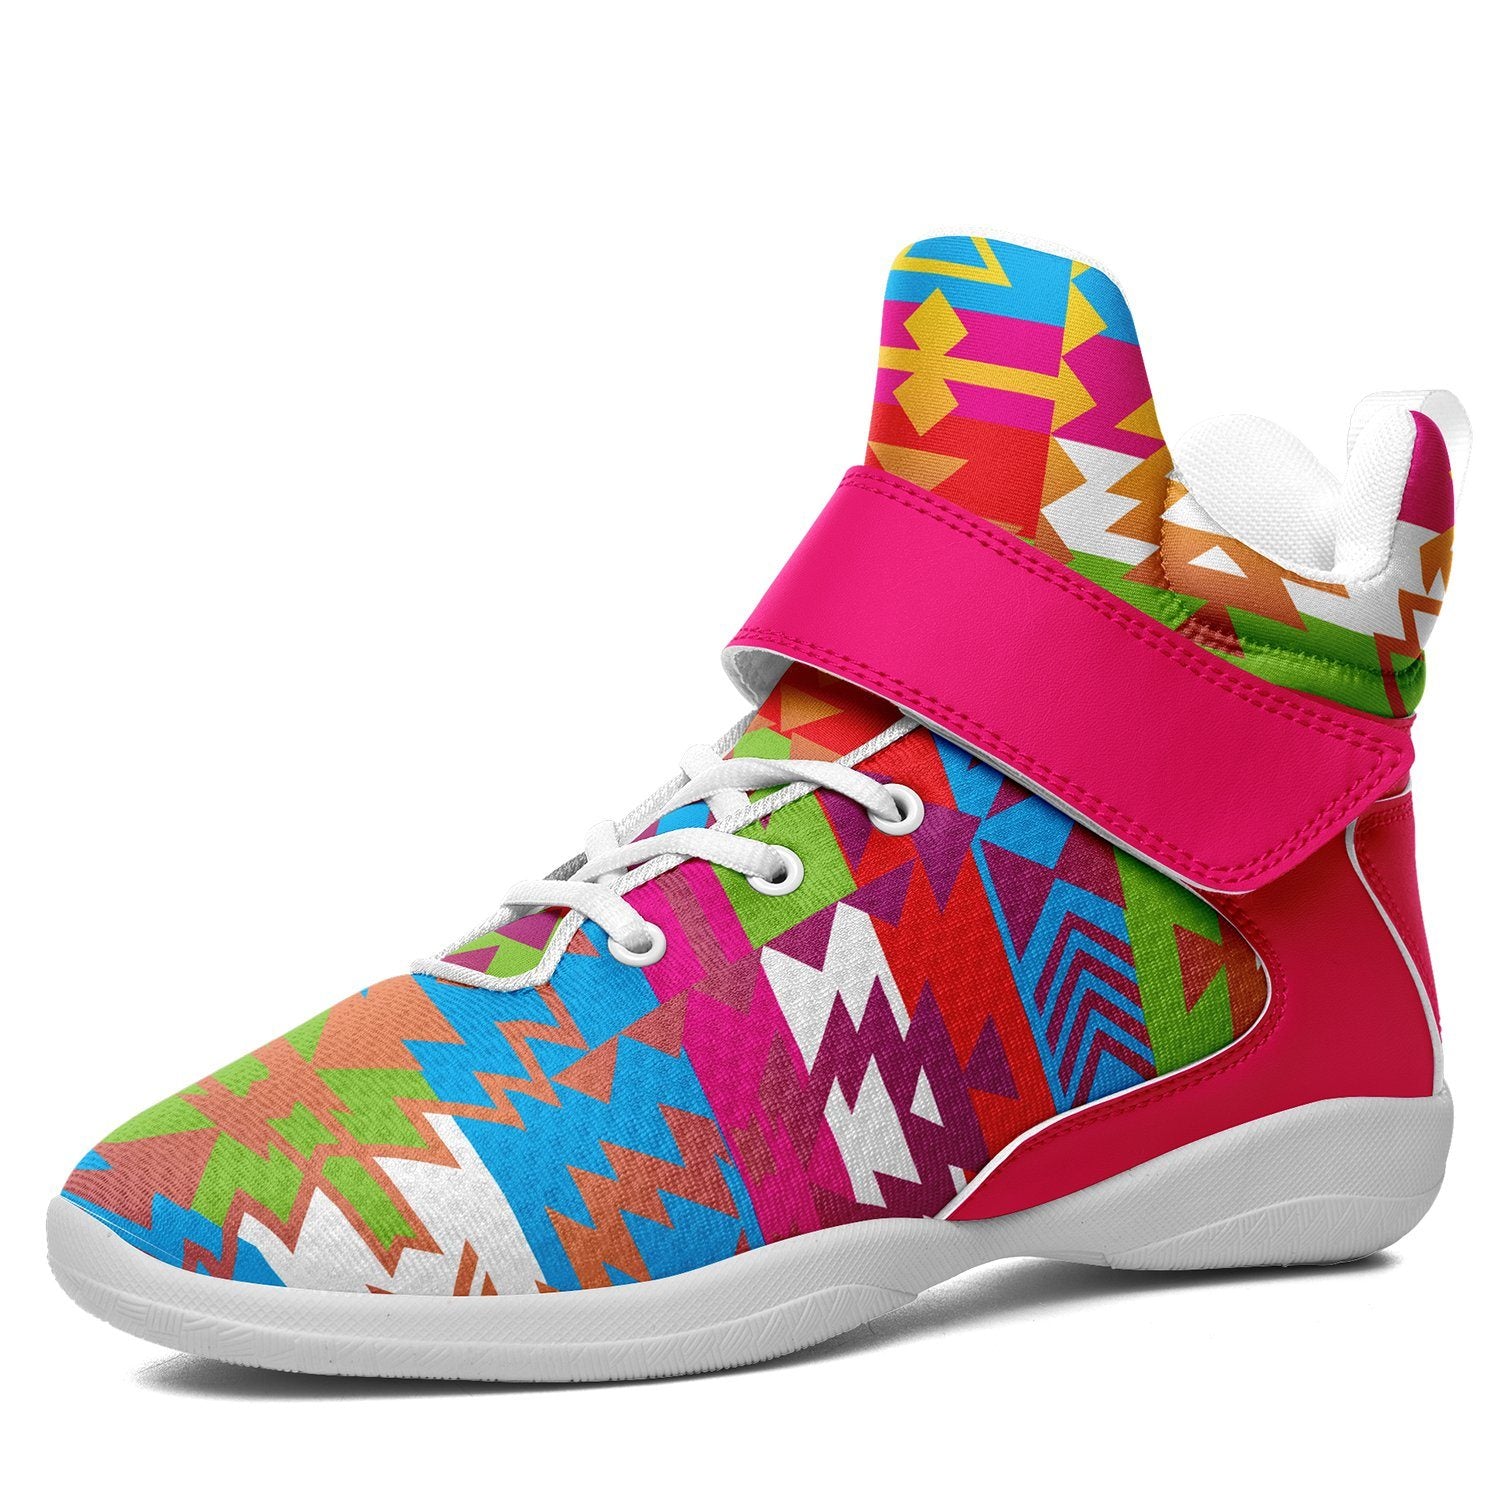 Grand Entry Ipottaa Basketball / Sport High Top Shoes 49 Dzine US Women 4.5 / US Youth 3.5 / EUR 35 White Sole with Pink Strap 